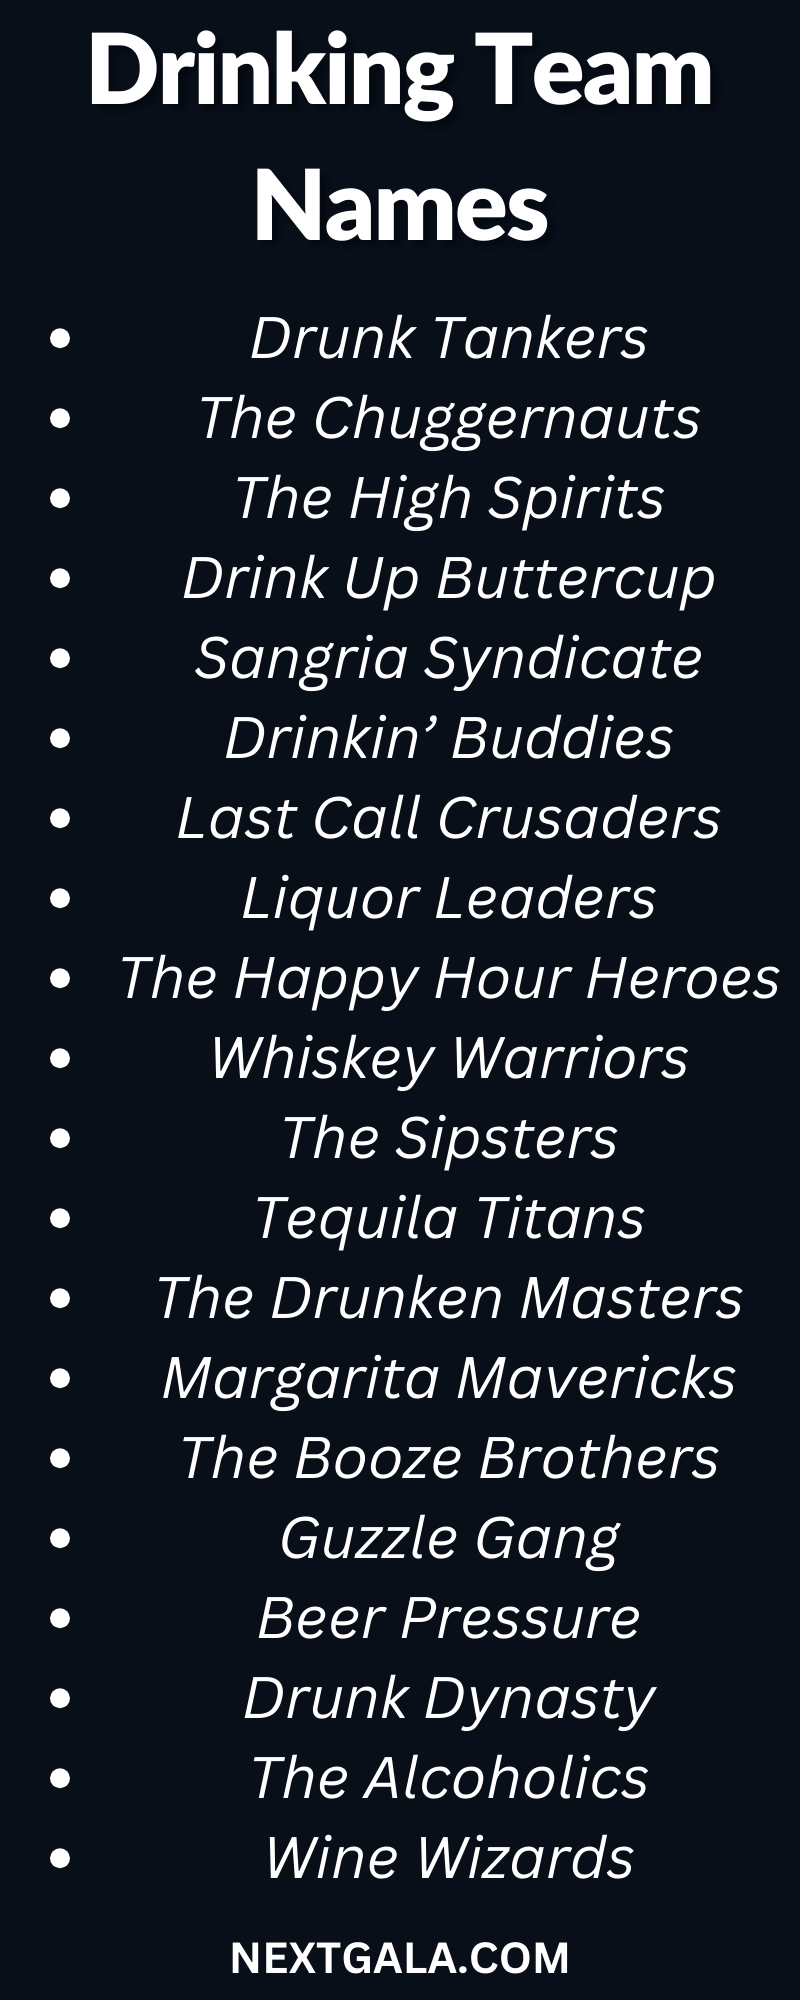 Drinking Team Names